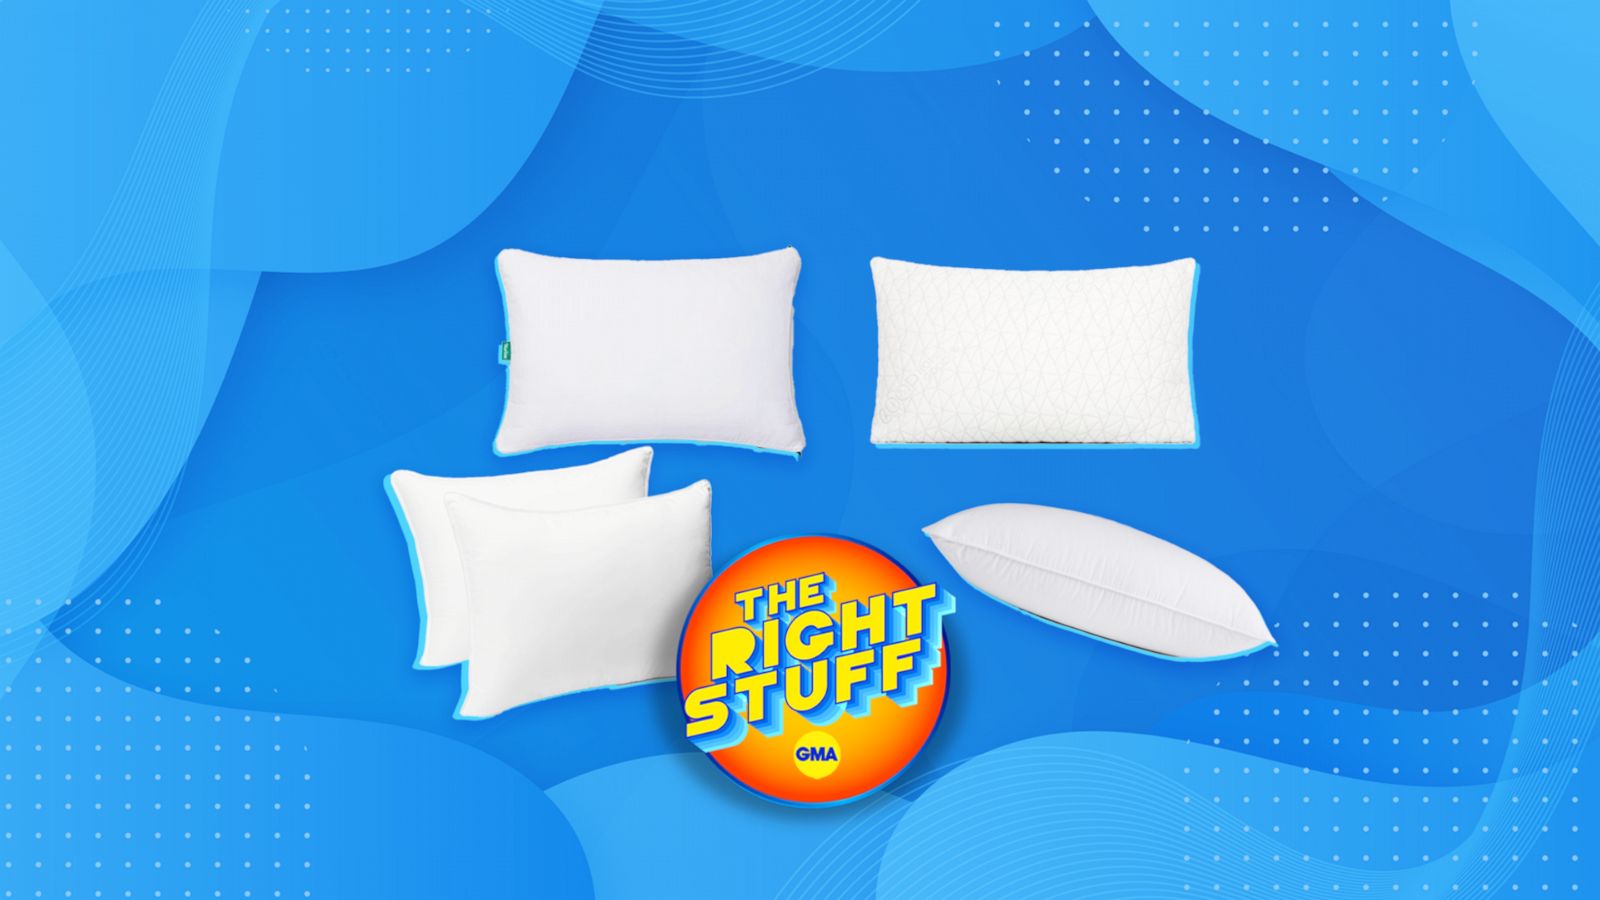 Shoppers Are 'Sleeping Better' Thanks to This Pillow